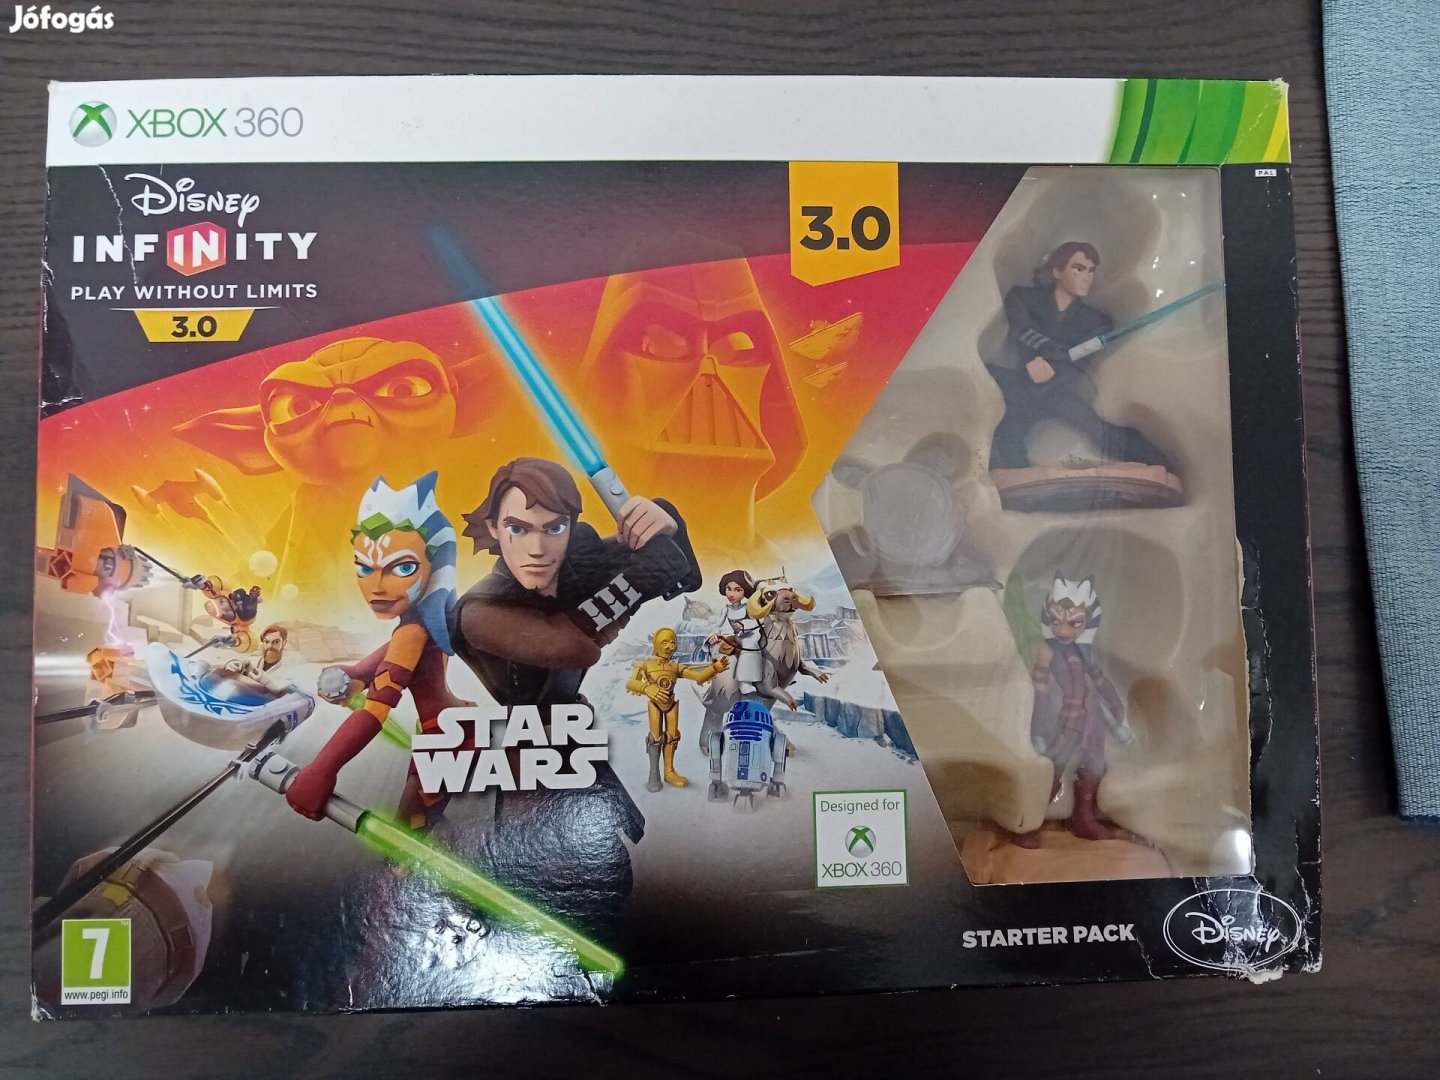 Xbox 360 Disney infinity play without limits 3.0